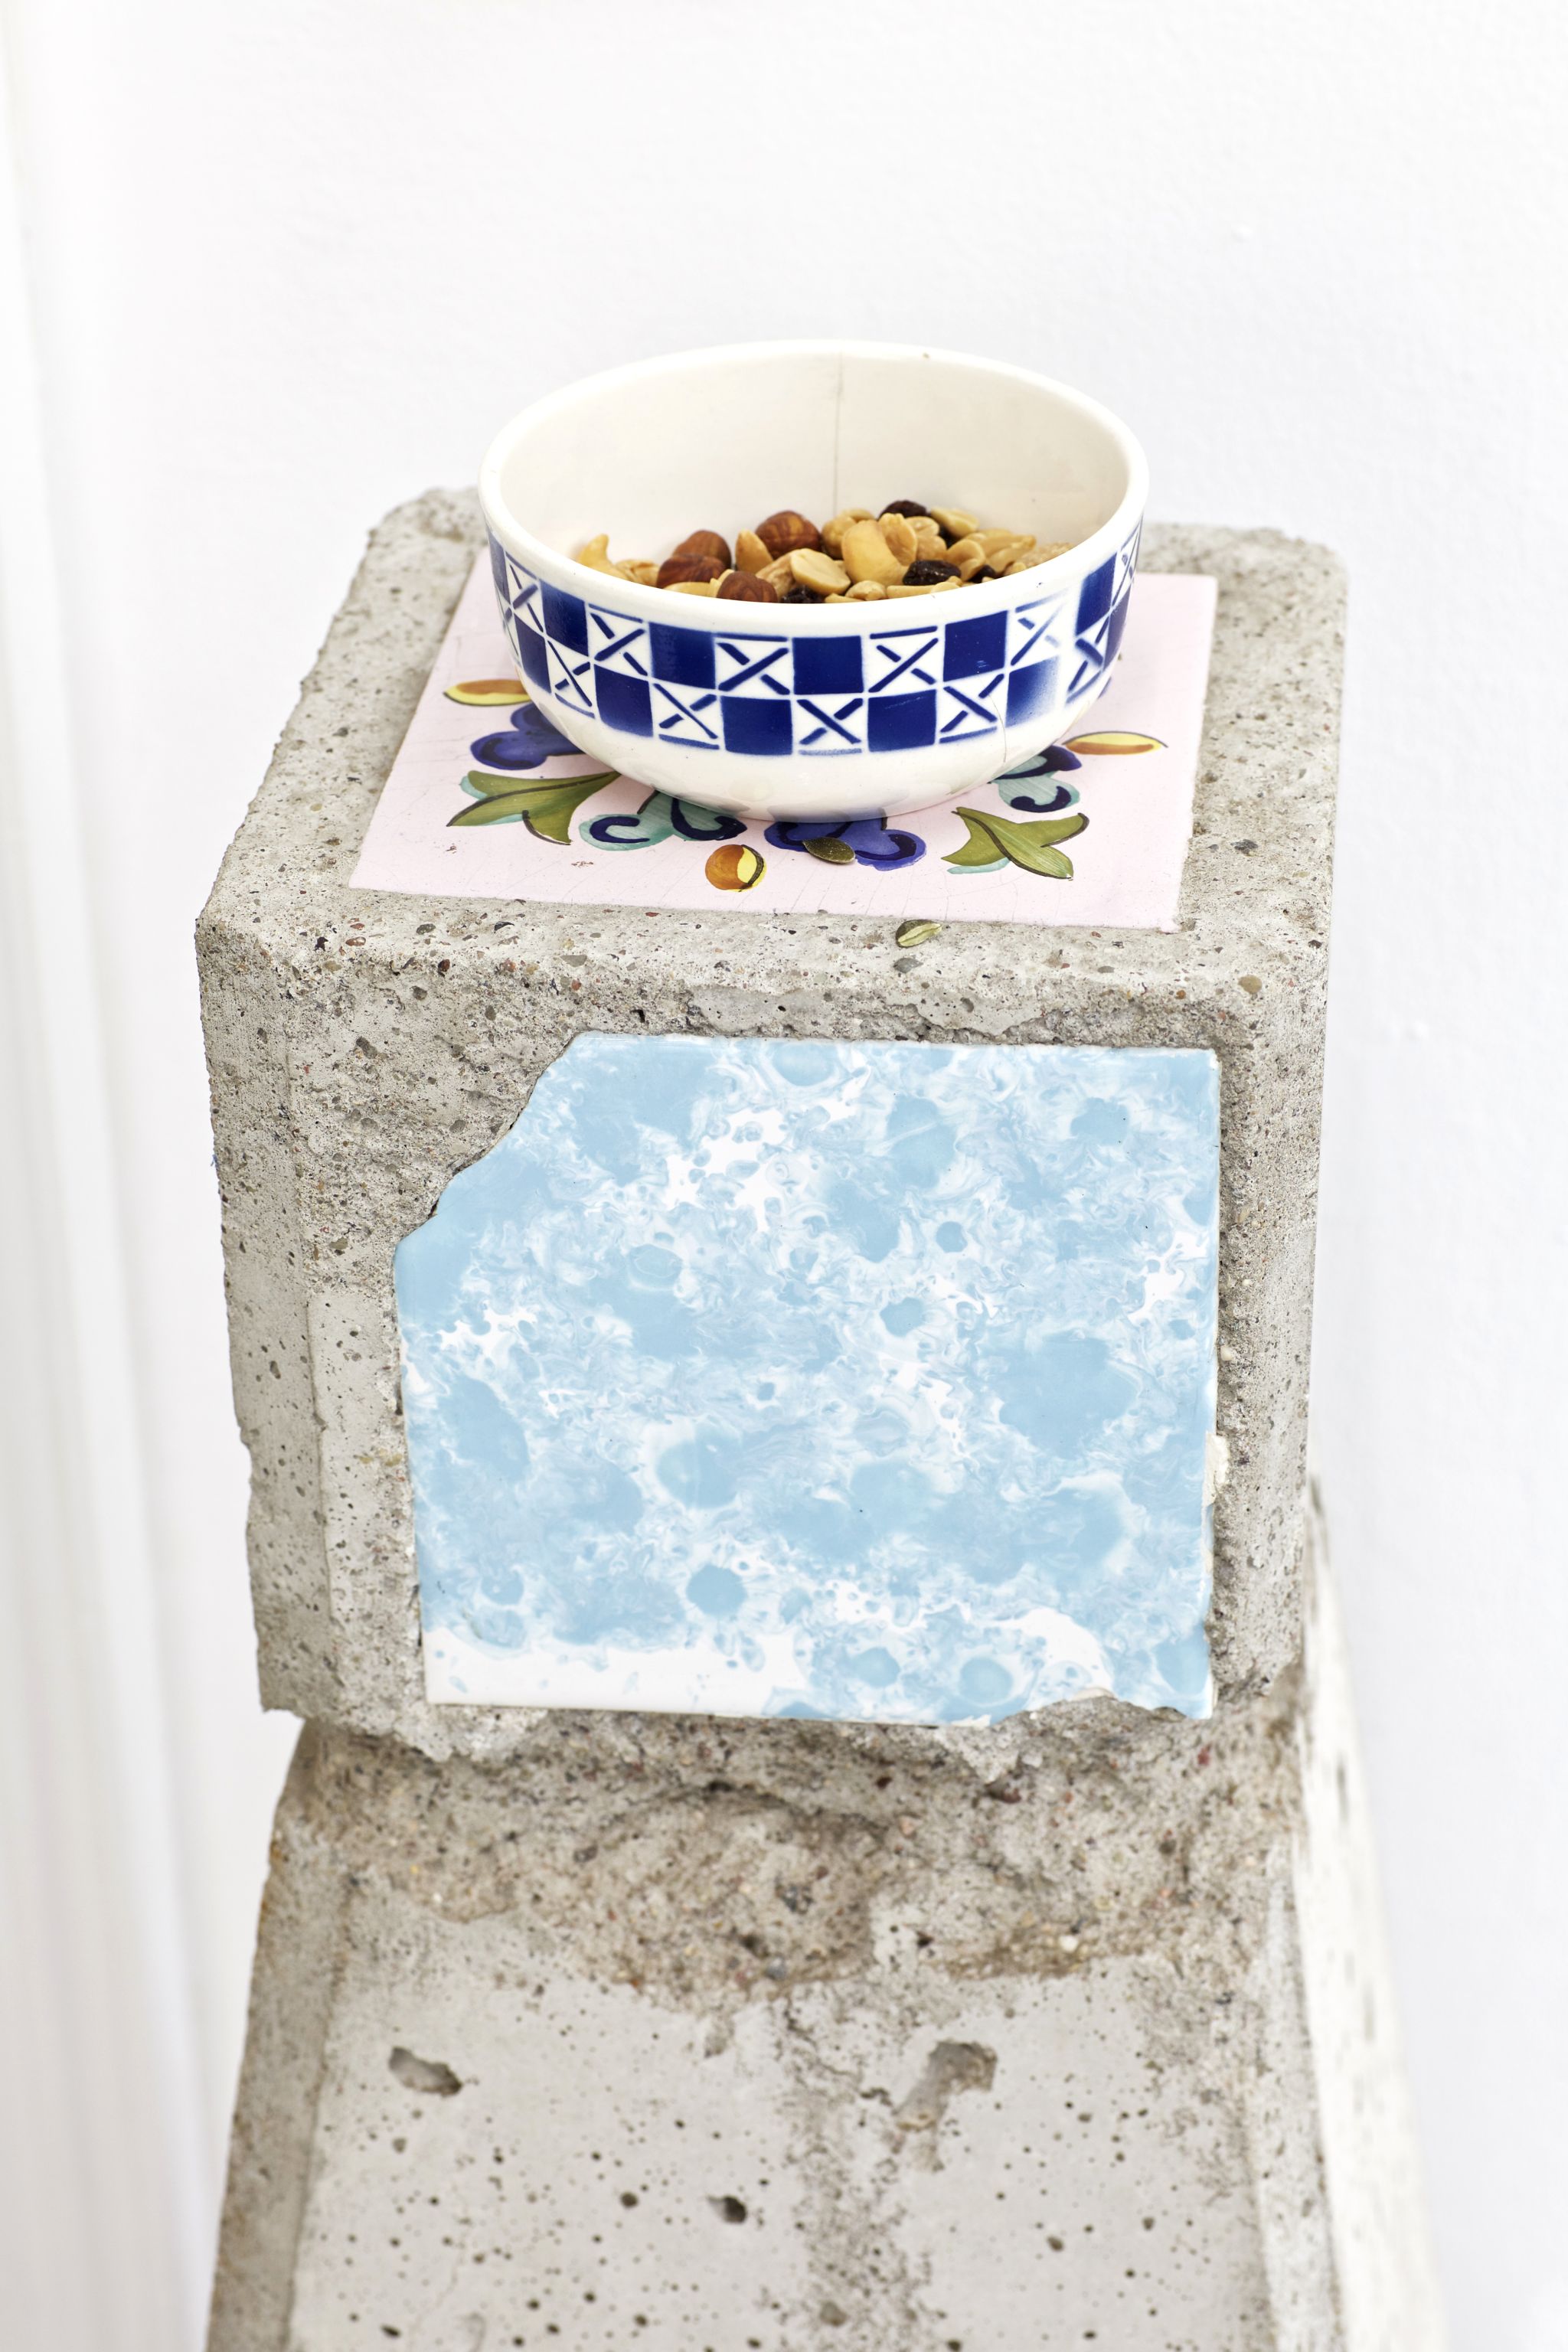 Manfred Pernice & Martin Städeli, Abbruch (d. Bez.) (detail), 2015, Cement, tiles, one bowl, snack mix, 1 tomato carton, 1 bottle holder, 2 jigsaw puzzle borders, 2 paper mache objects, 1 synthetic butterfly, 1 copy (Das Holz ist teuer und . . .) (H. Daumier), Site specific